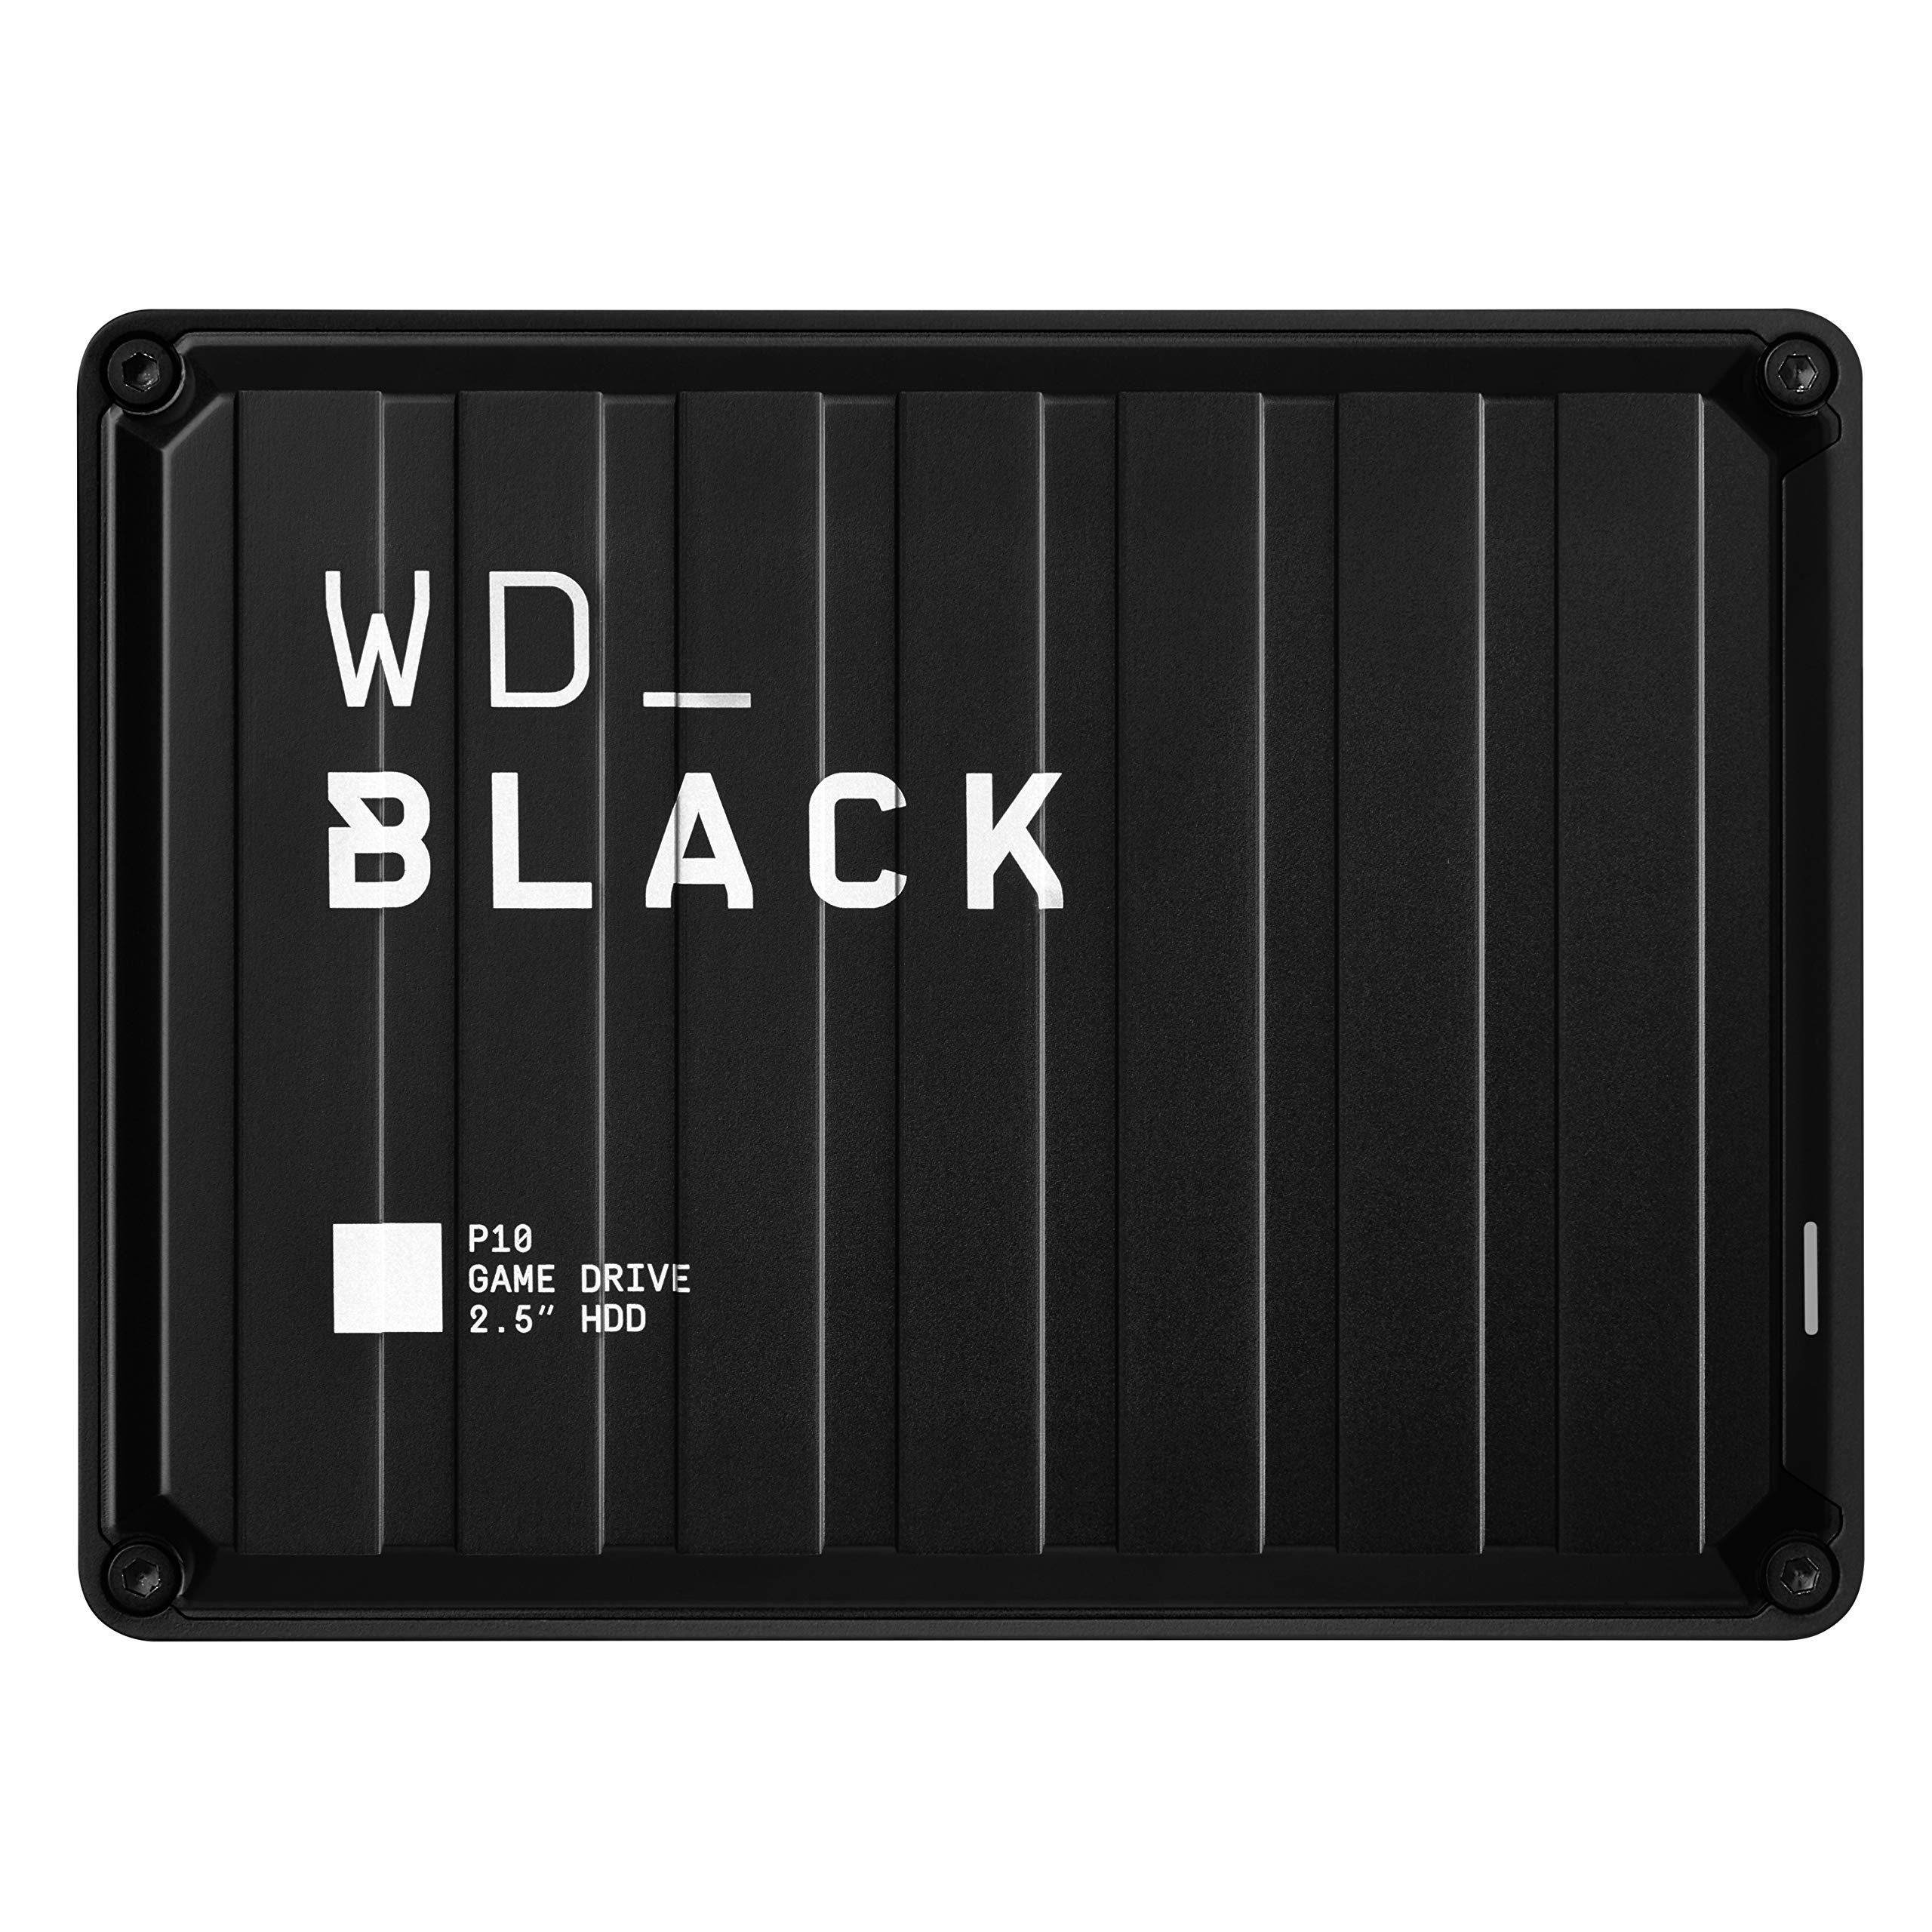 WD_BLACK 5TB P10 Game Drive - Portable External Hard Drive HDD, Compatible with Playstation, Xbox, PC, & Mac - WDBA3A0050BBK-WESN $120